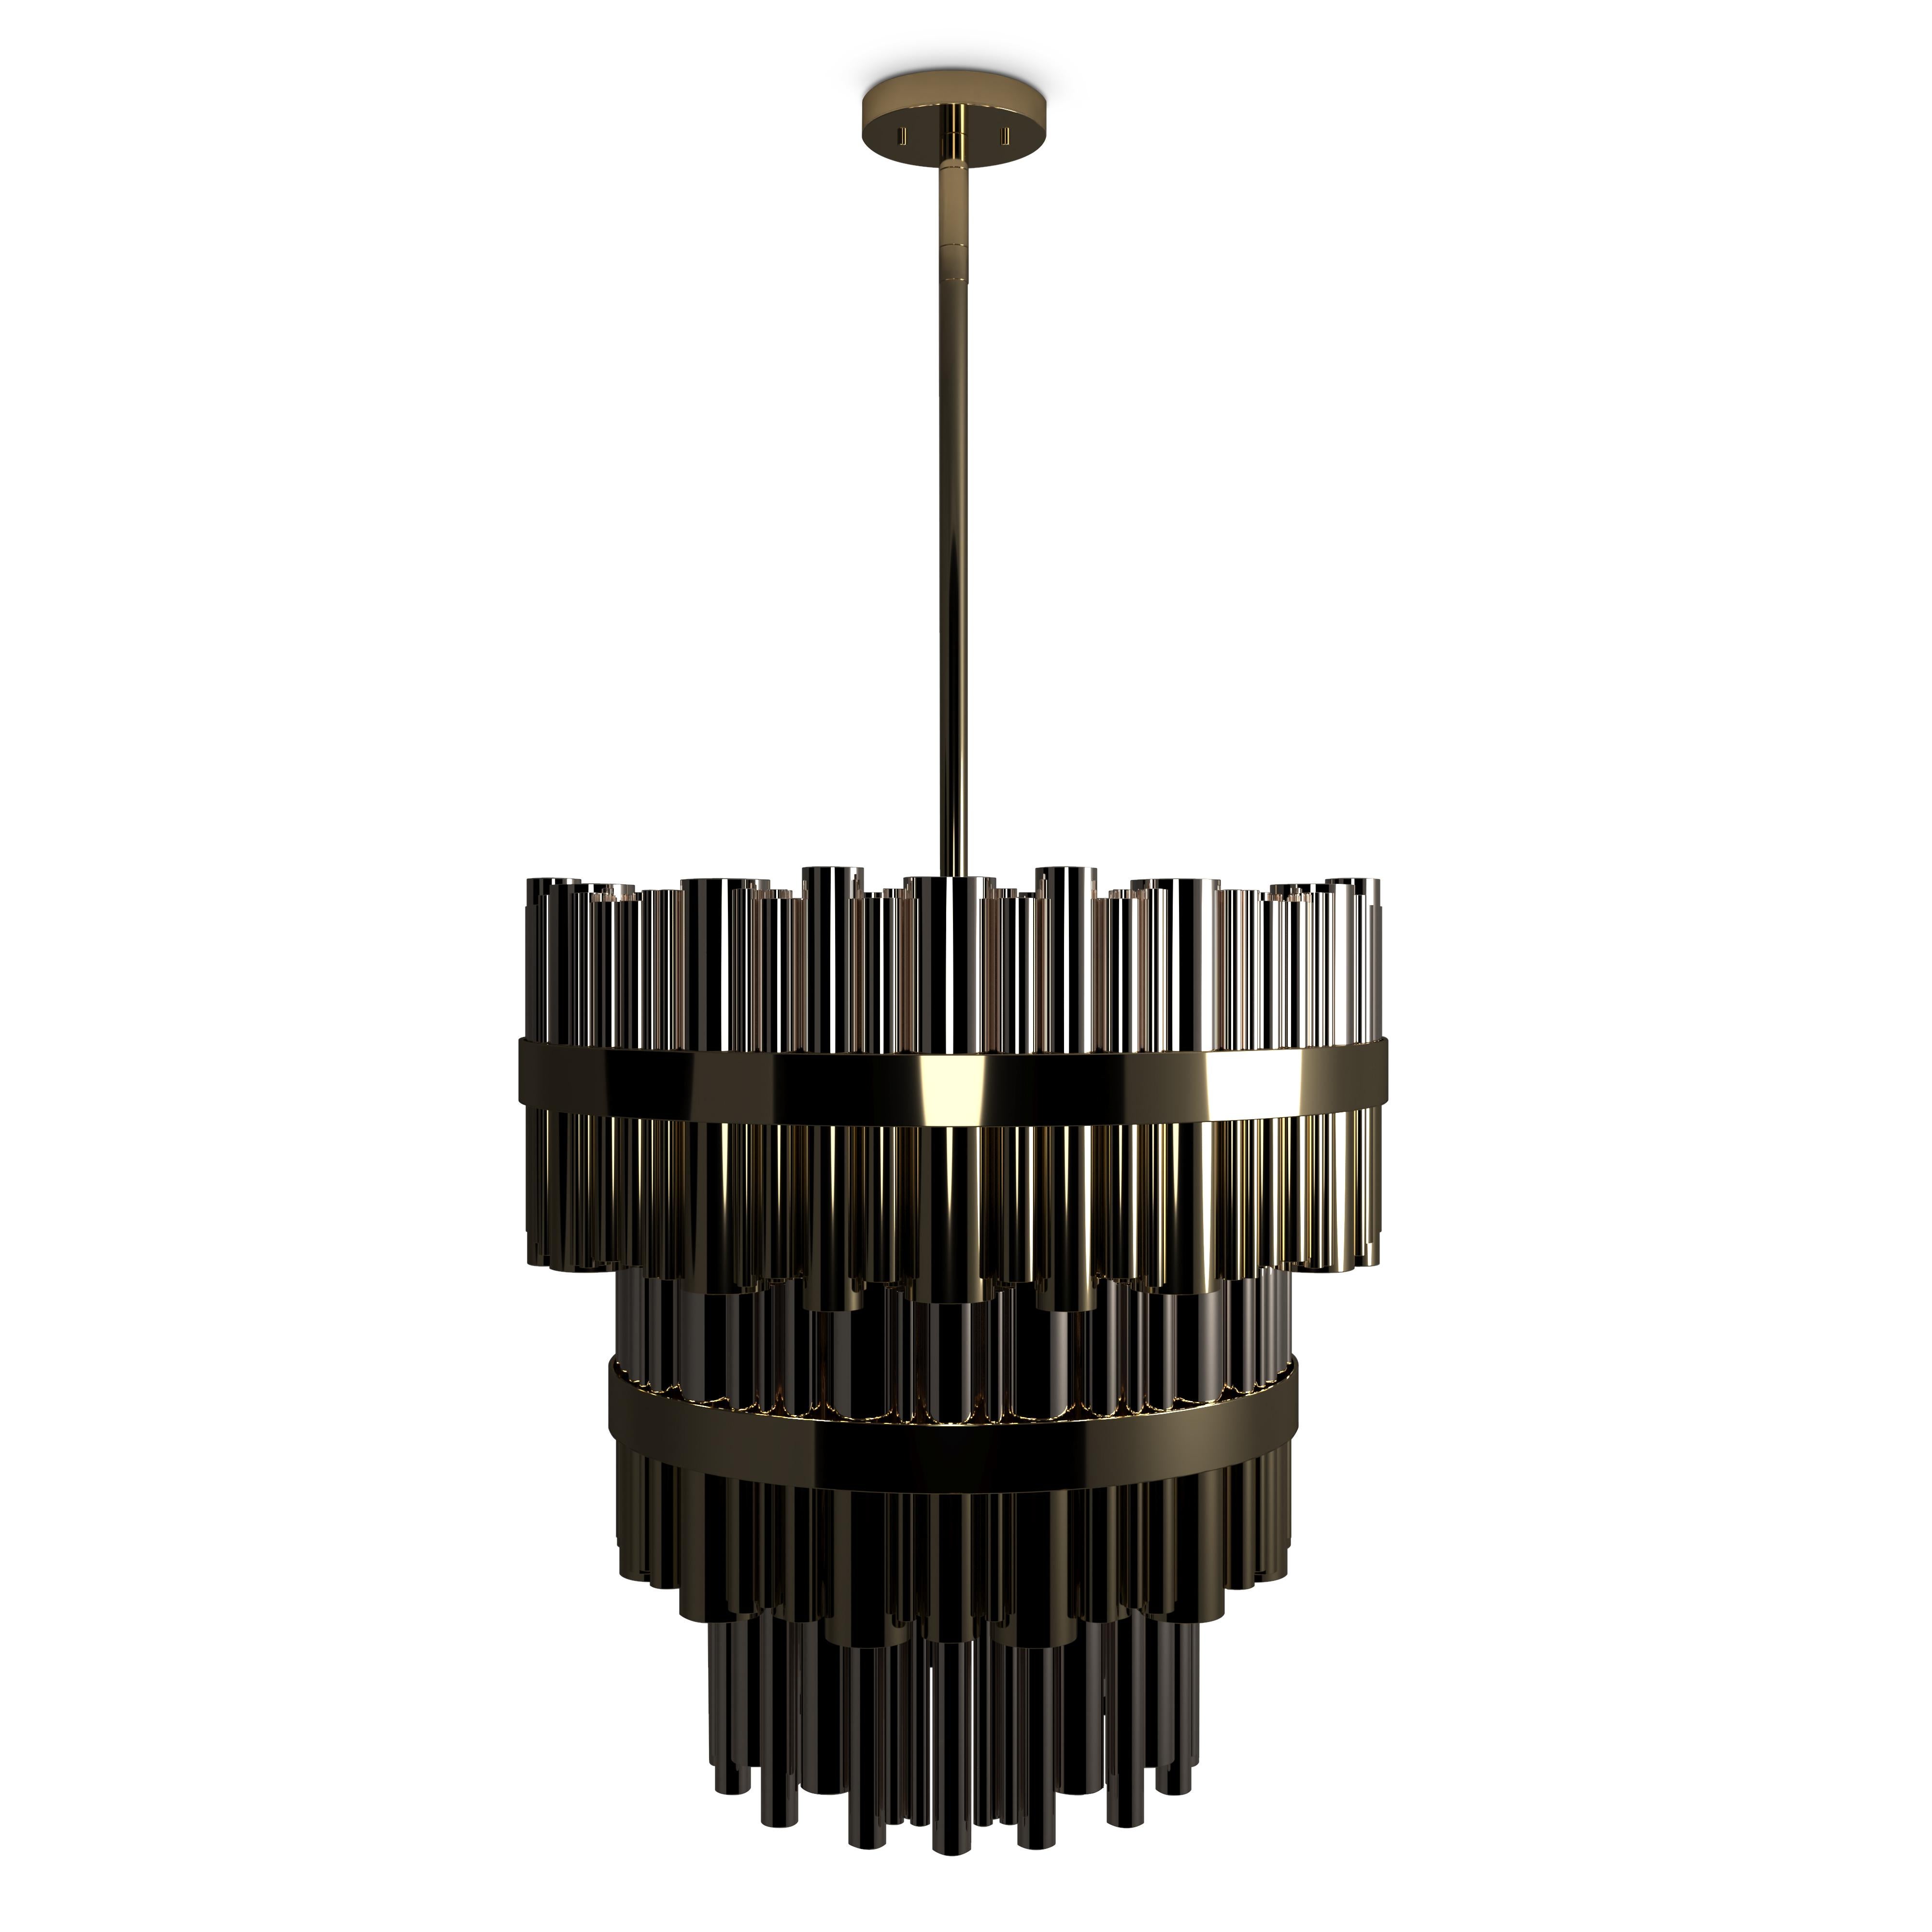 Portuguese 21st Century Brass Granville Chandelier by Creativemary For Sale